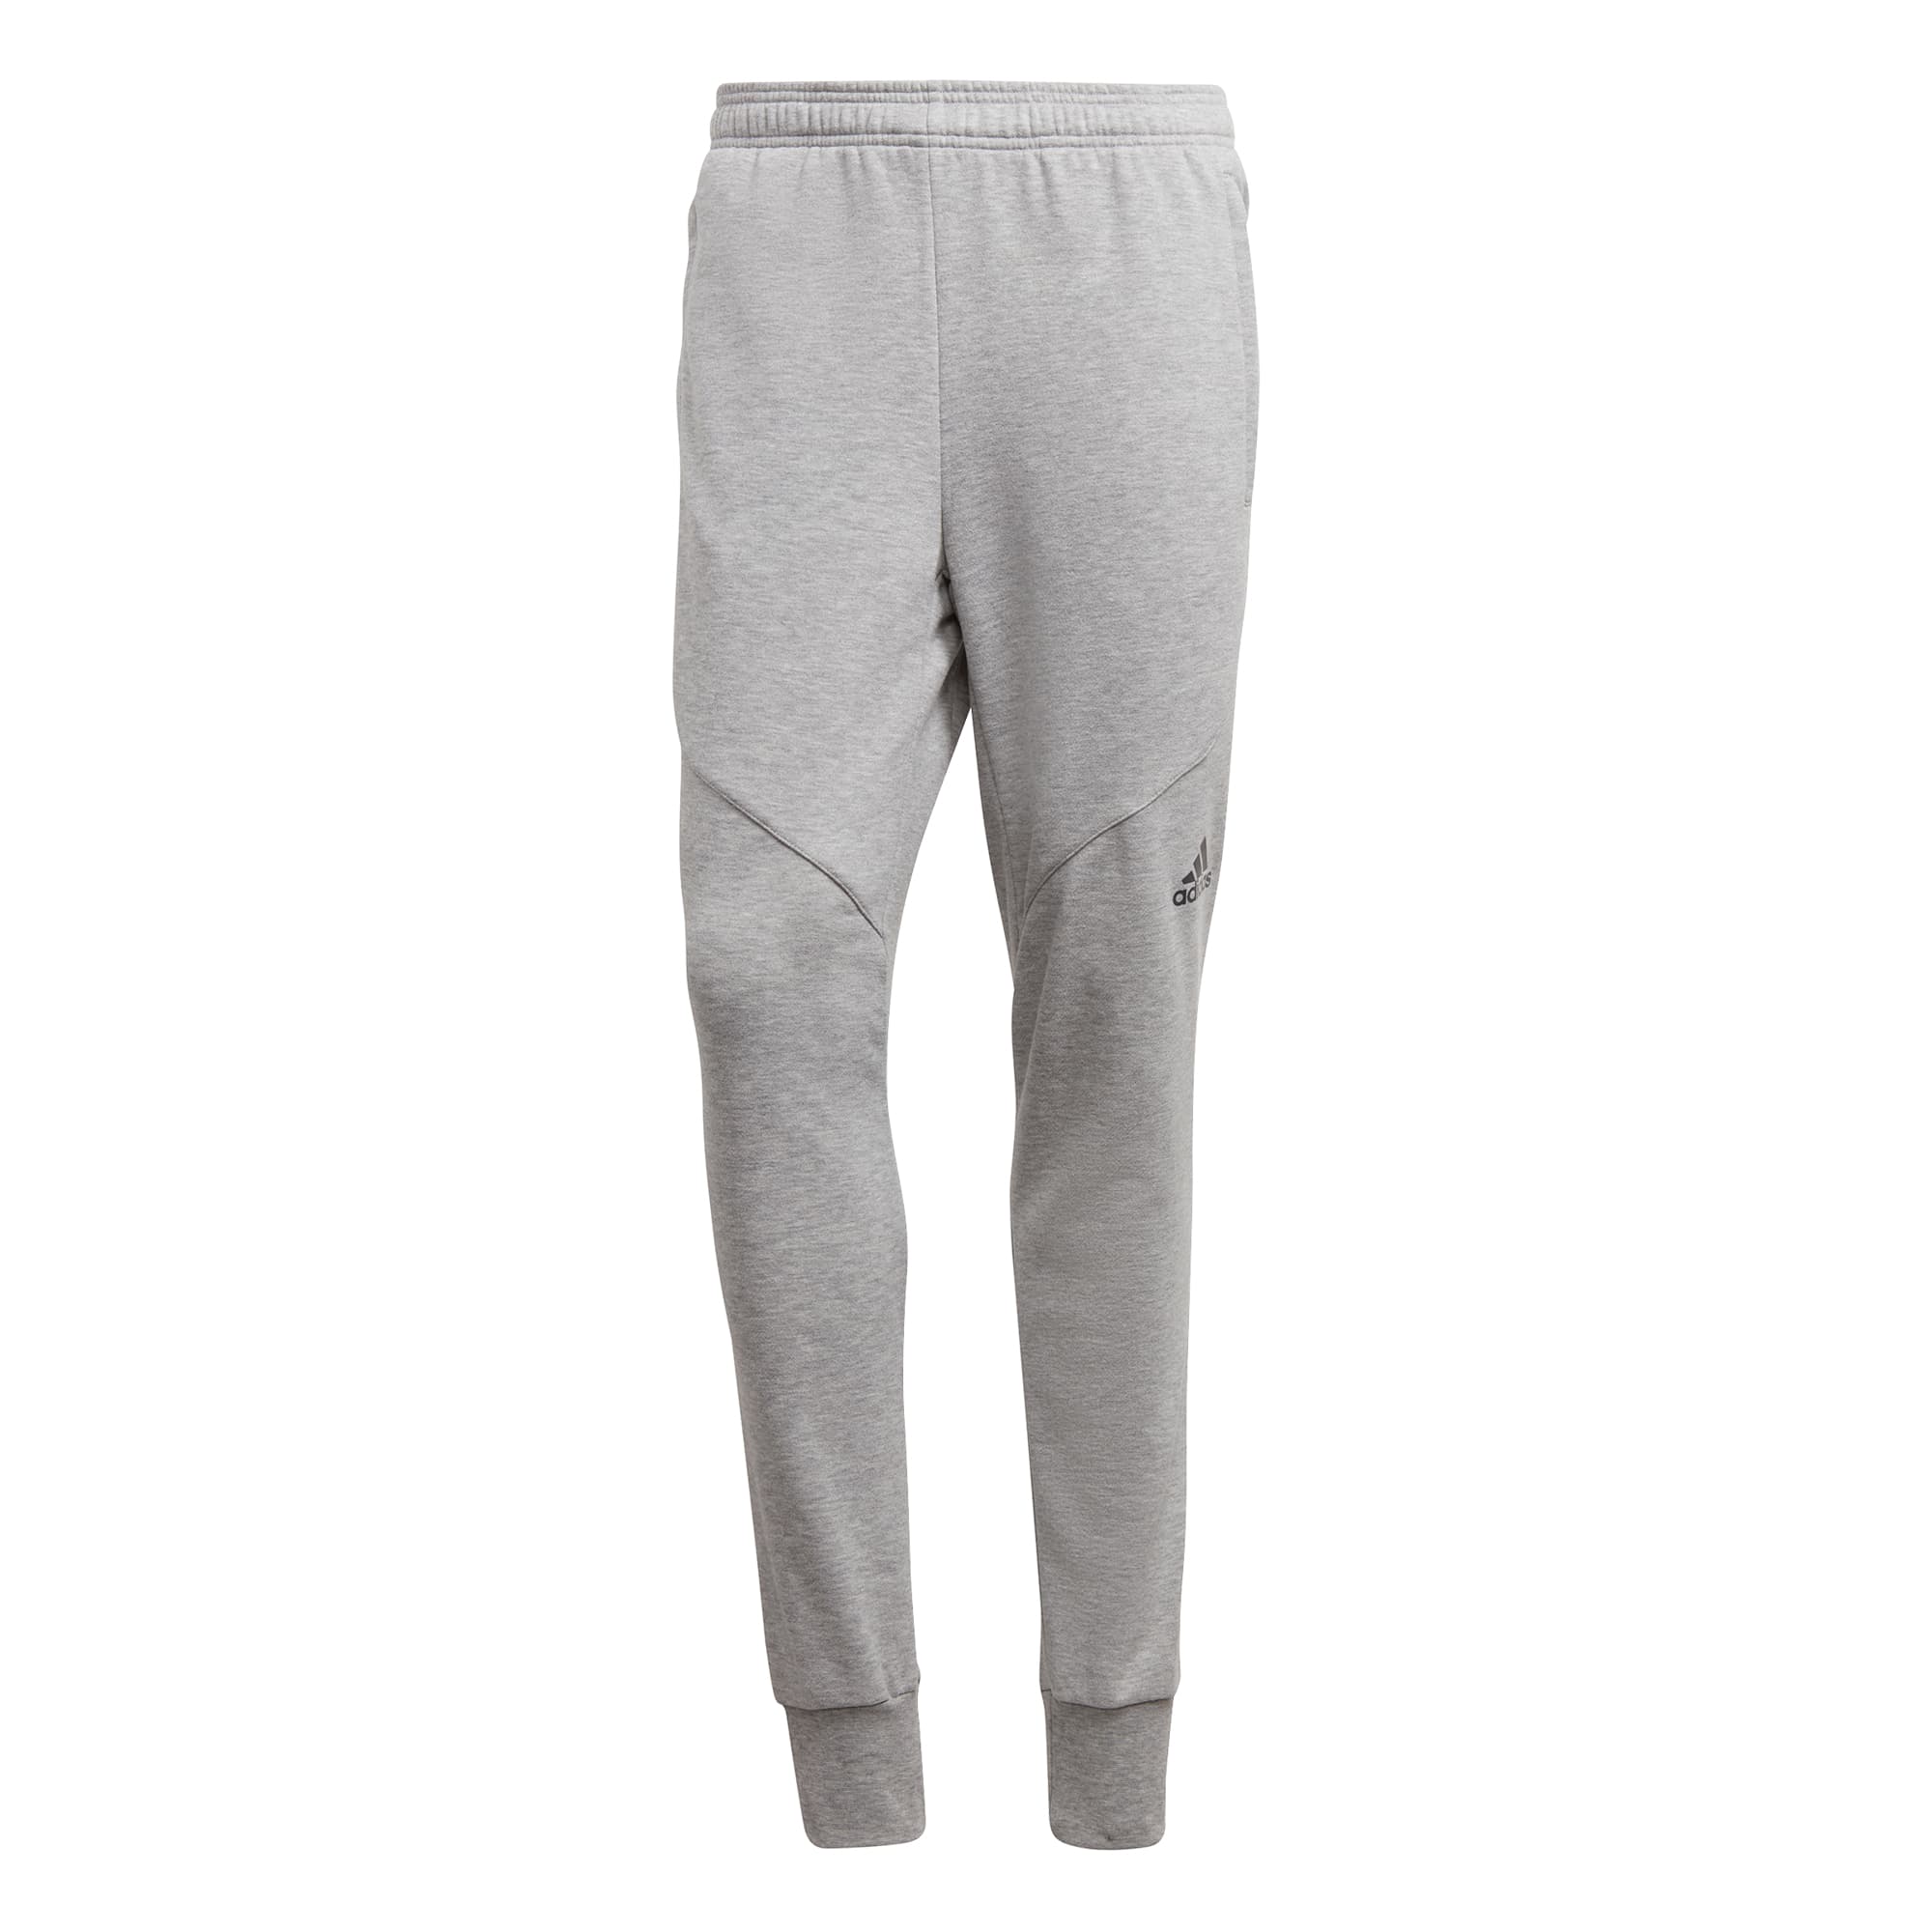 Buy ADIDAS Wo Pant Prime from Outnorth